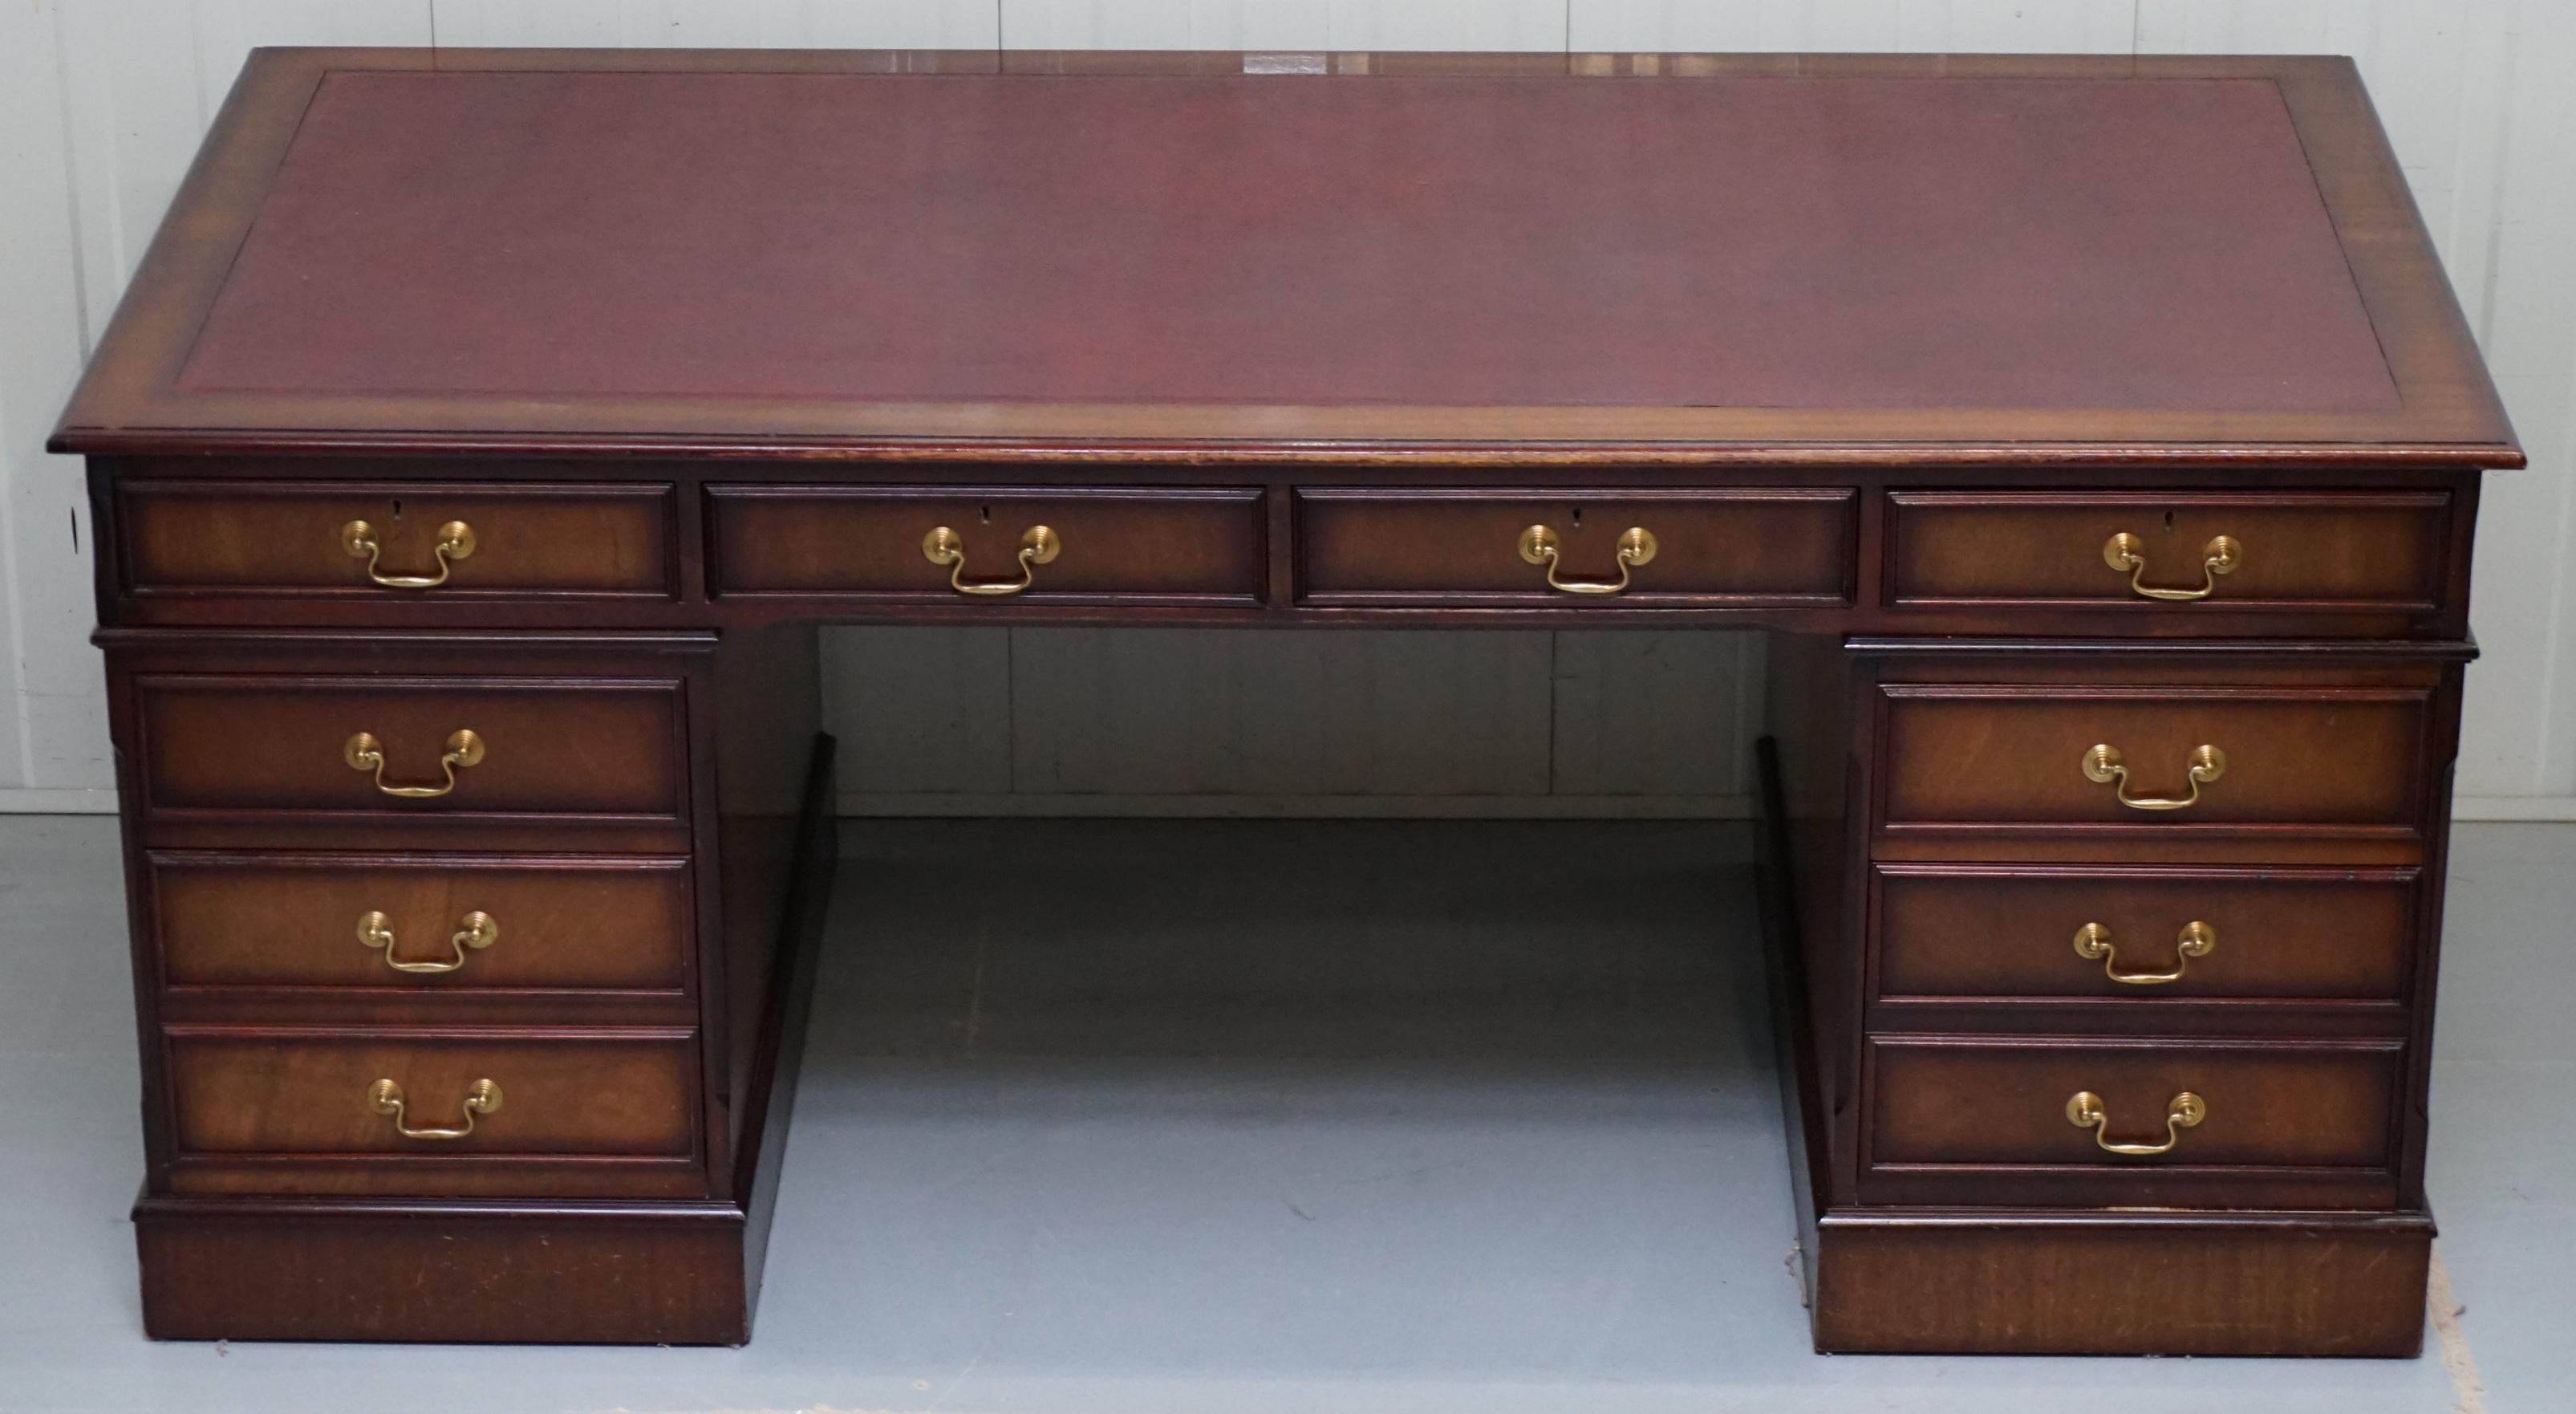 We are delighted to offer for sale this lovely extra leg room twin pedestal partner desk with oxblood leather top and mahogany frame,

A very well made piece, this desk has four drawers across the top instead of three, the end result is you have